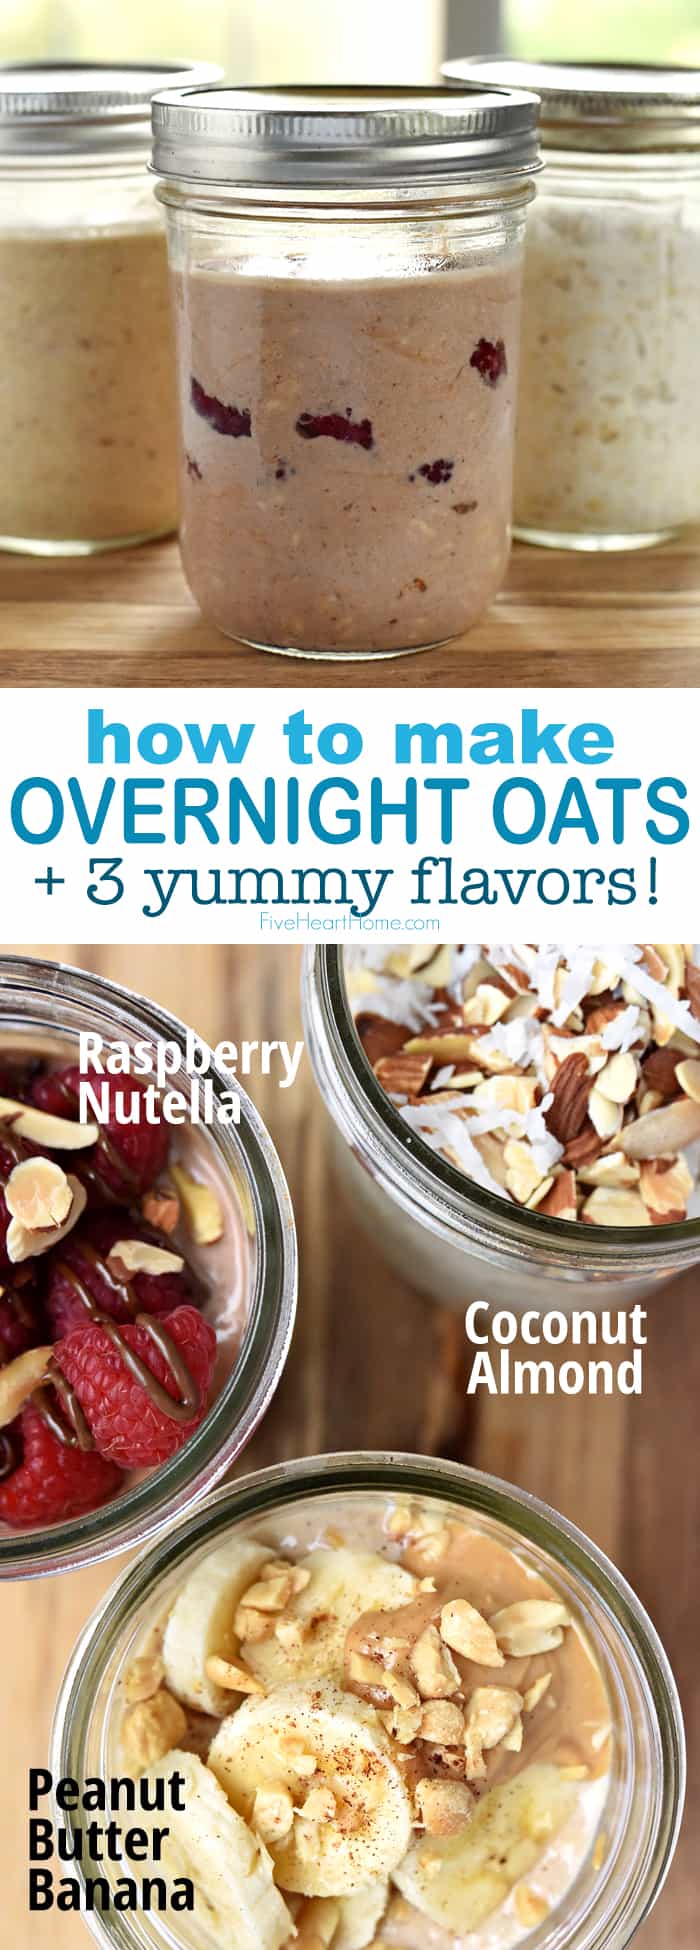 https://www.fivehearthome.com/wp-content/uploads/2019/03/Overnight-Oats-3-Flavors-Peanut-Butter-Banana-Raspberry-Nutella-Coconut-Almond-by-Five-Heart-Home_700pxCollageNewPin.jpg